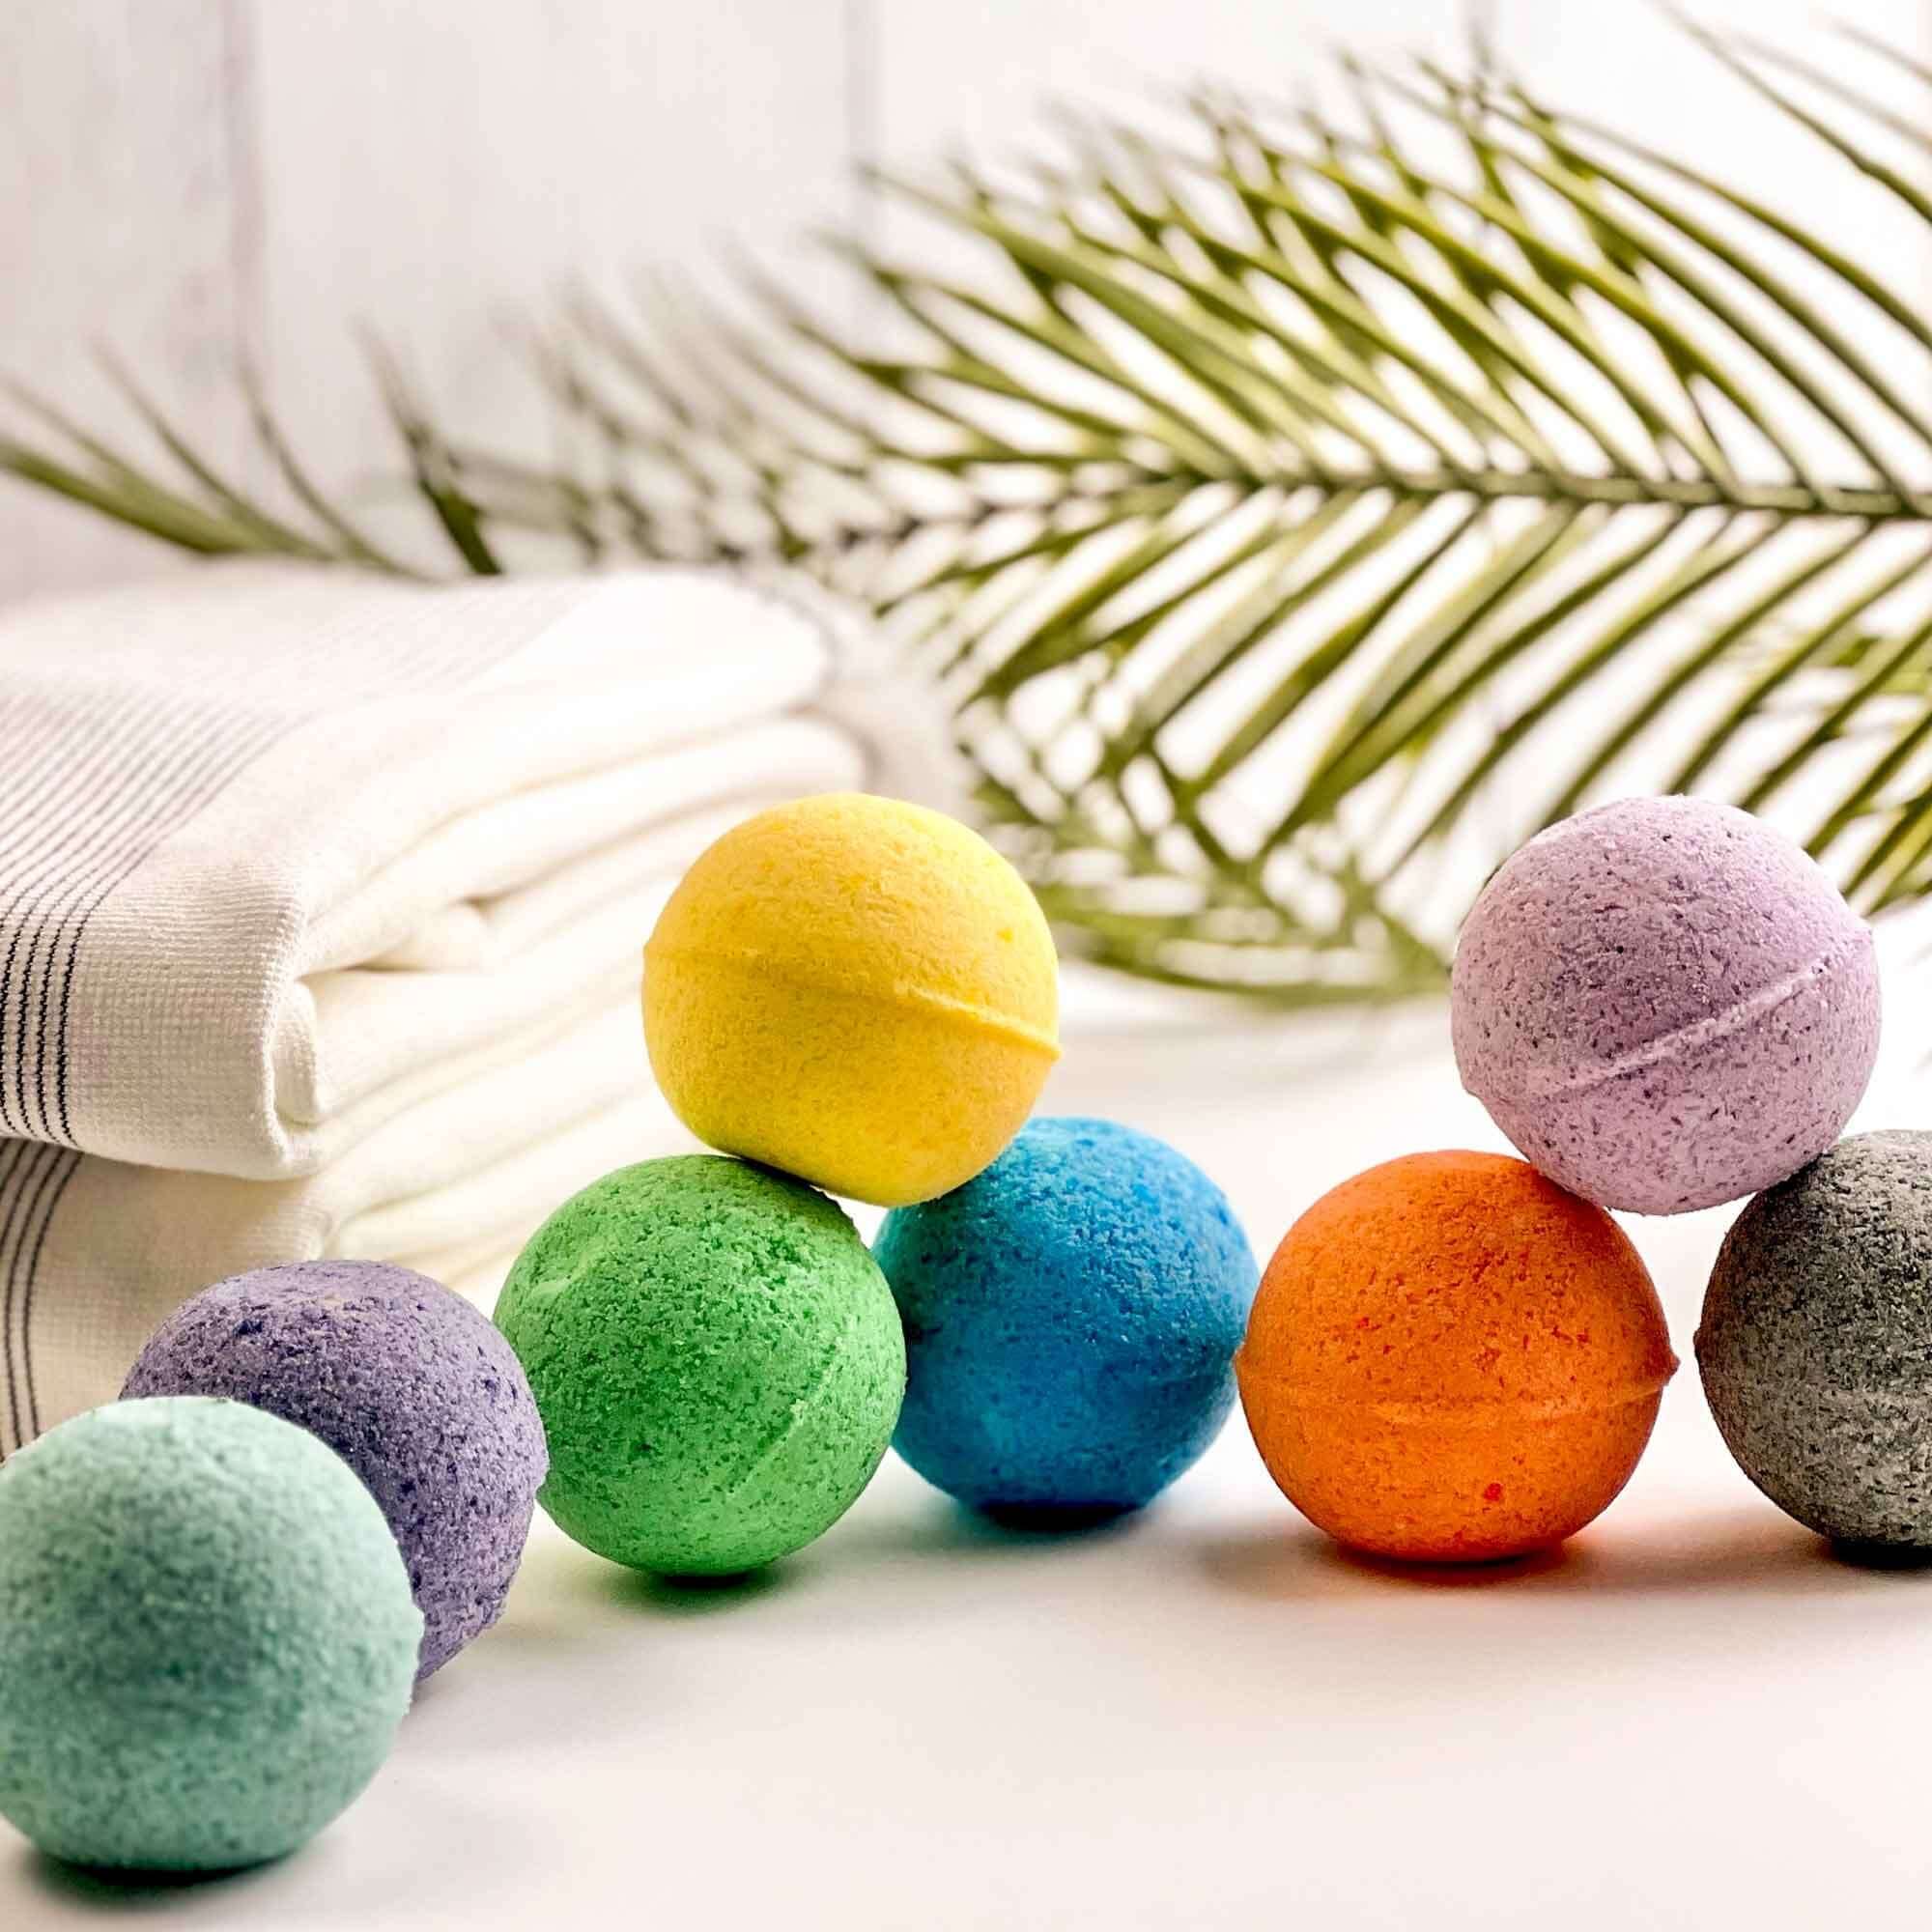 Indulge in a seaside escape with Caribbean Teakwood bath bombs - Handmade, Natural, and Soothing